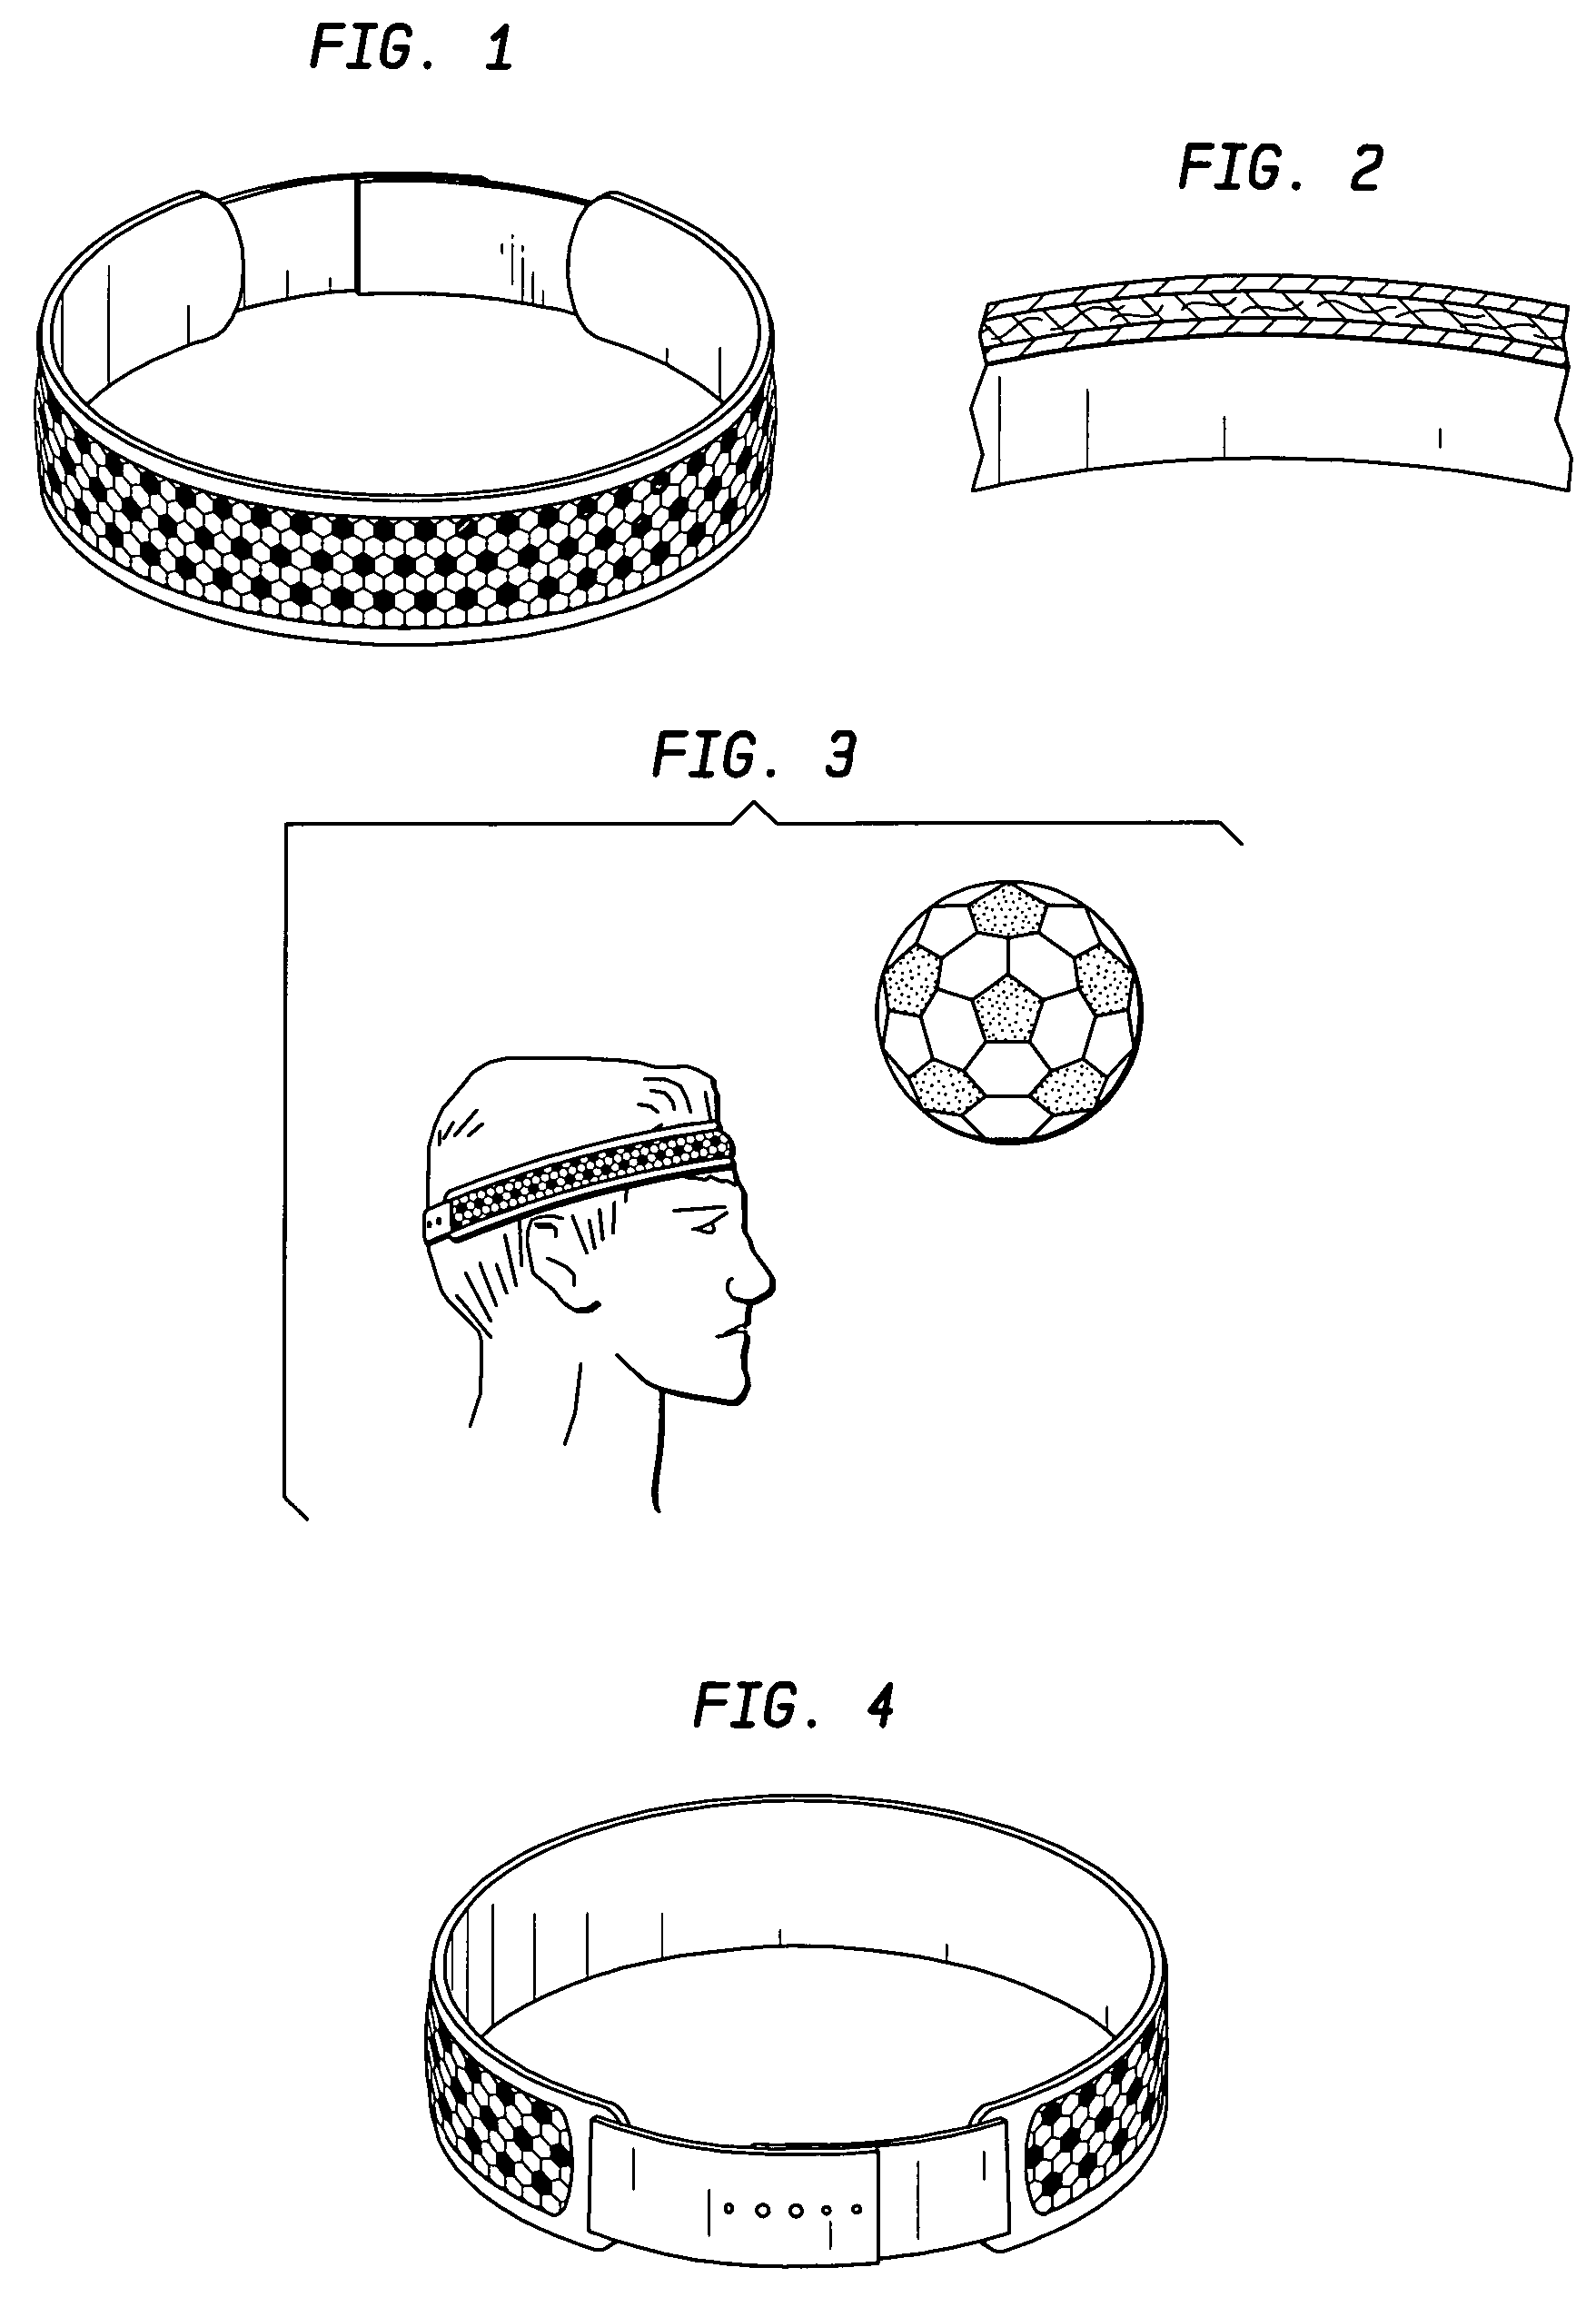 Sports headband to reduce or prevent head injury